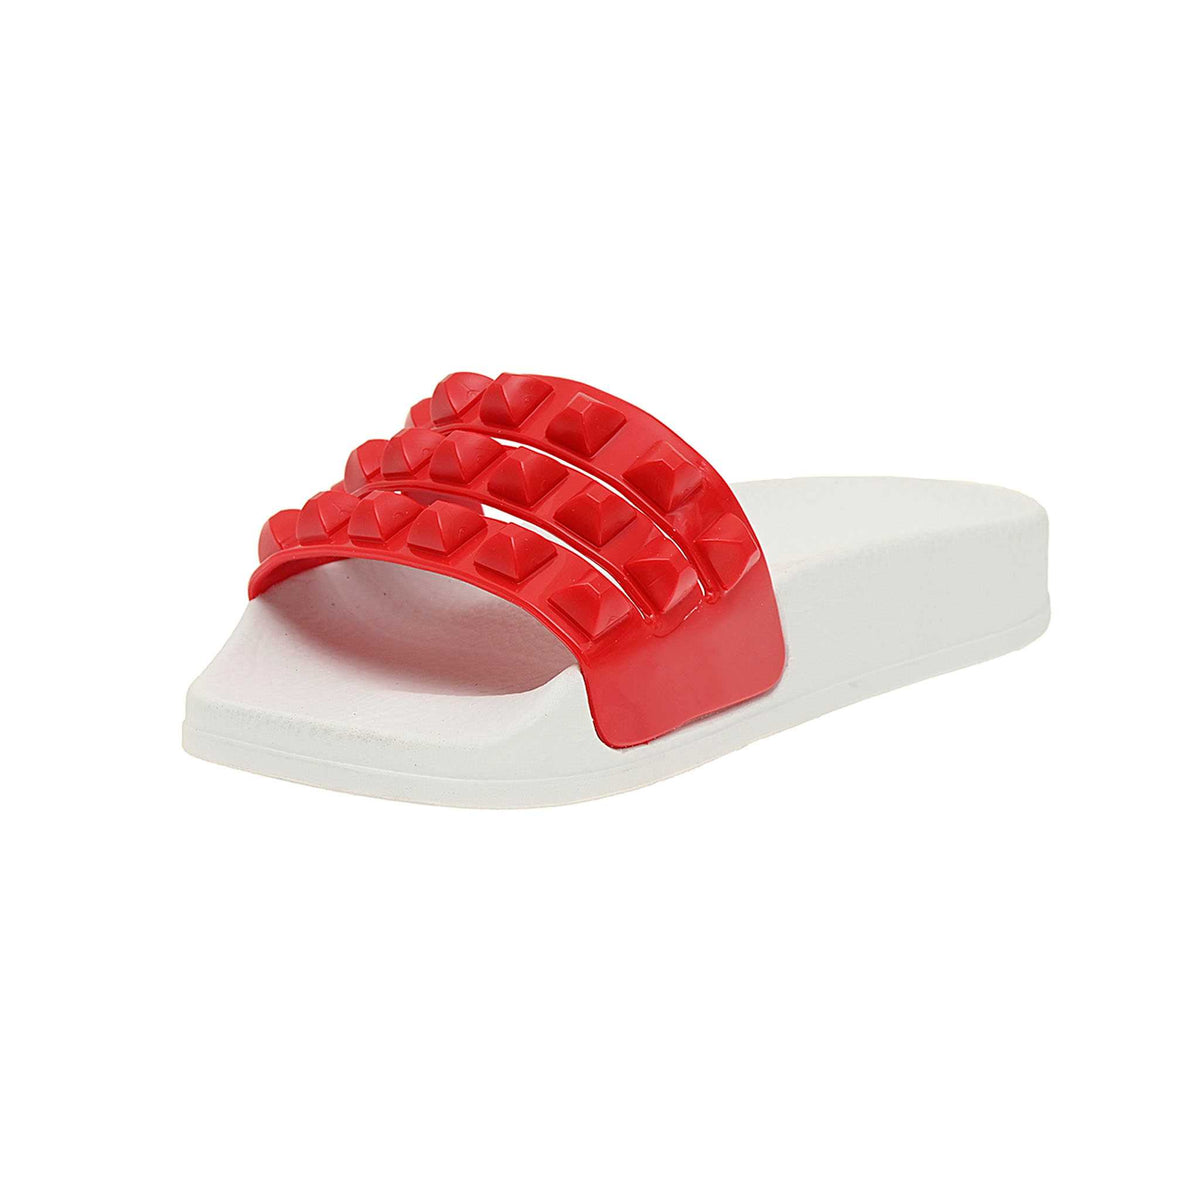 Franco white toddler jelly sandals with red color, 3 strap kids jellies sandals from minicarmensol unique comfort for kids.